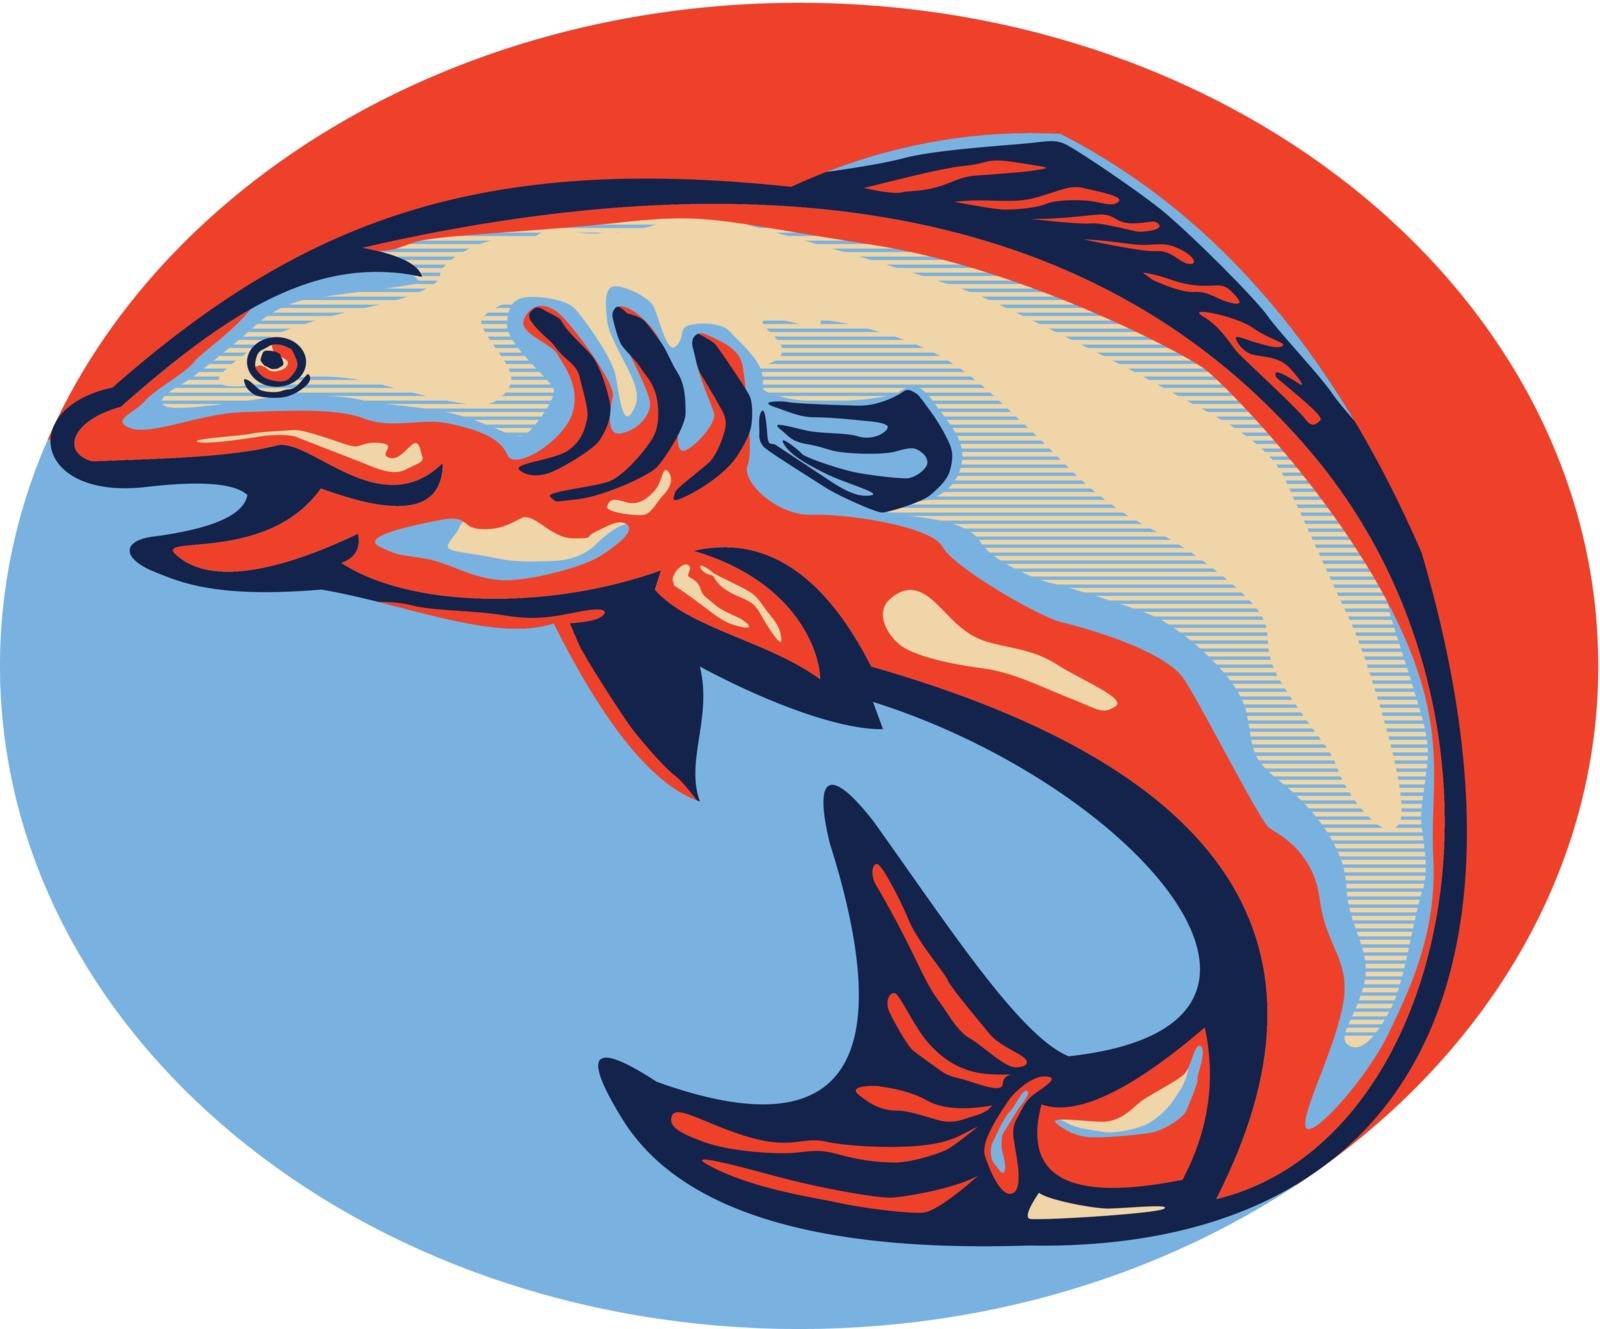 Illustration of an Atlantic salmon fish jumping done in retro style